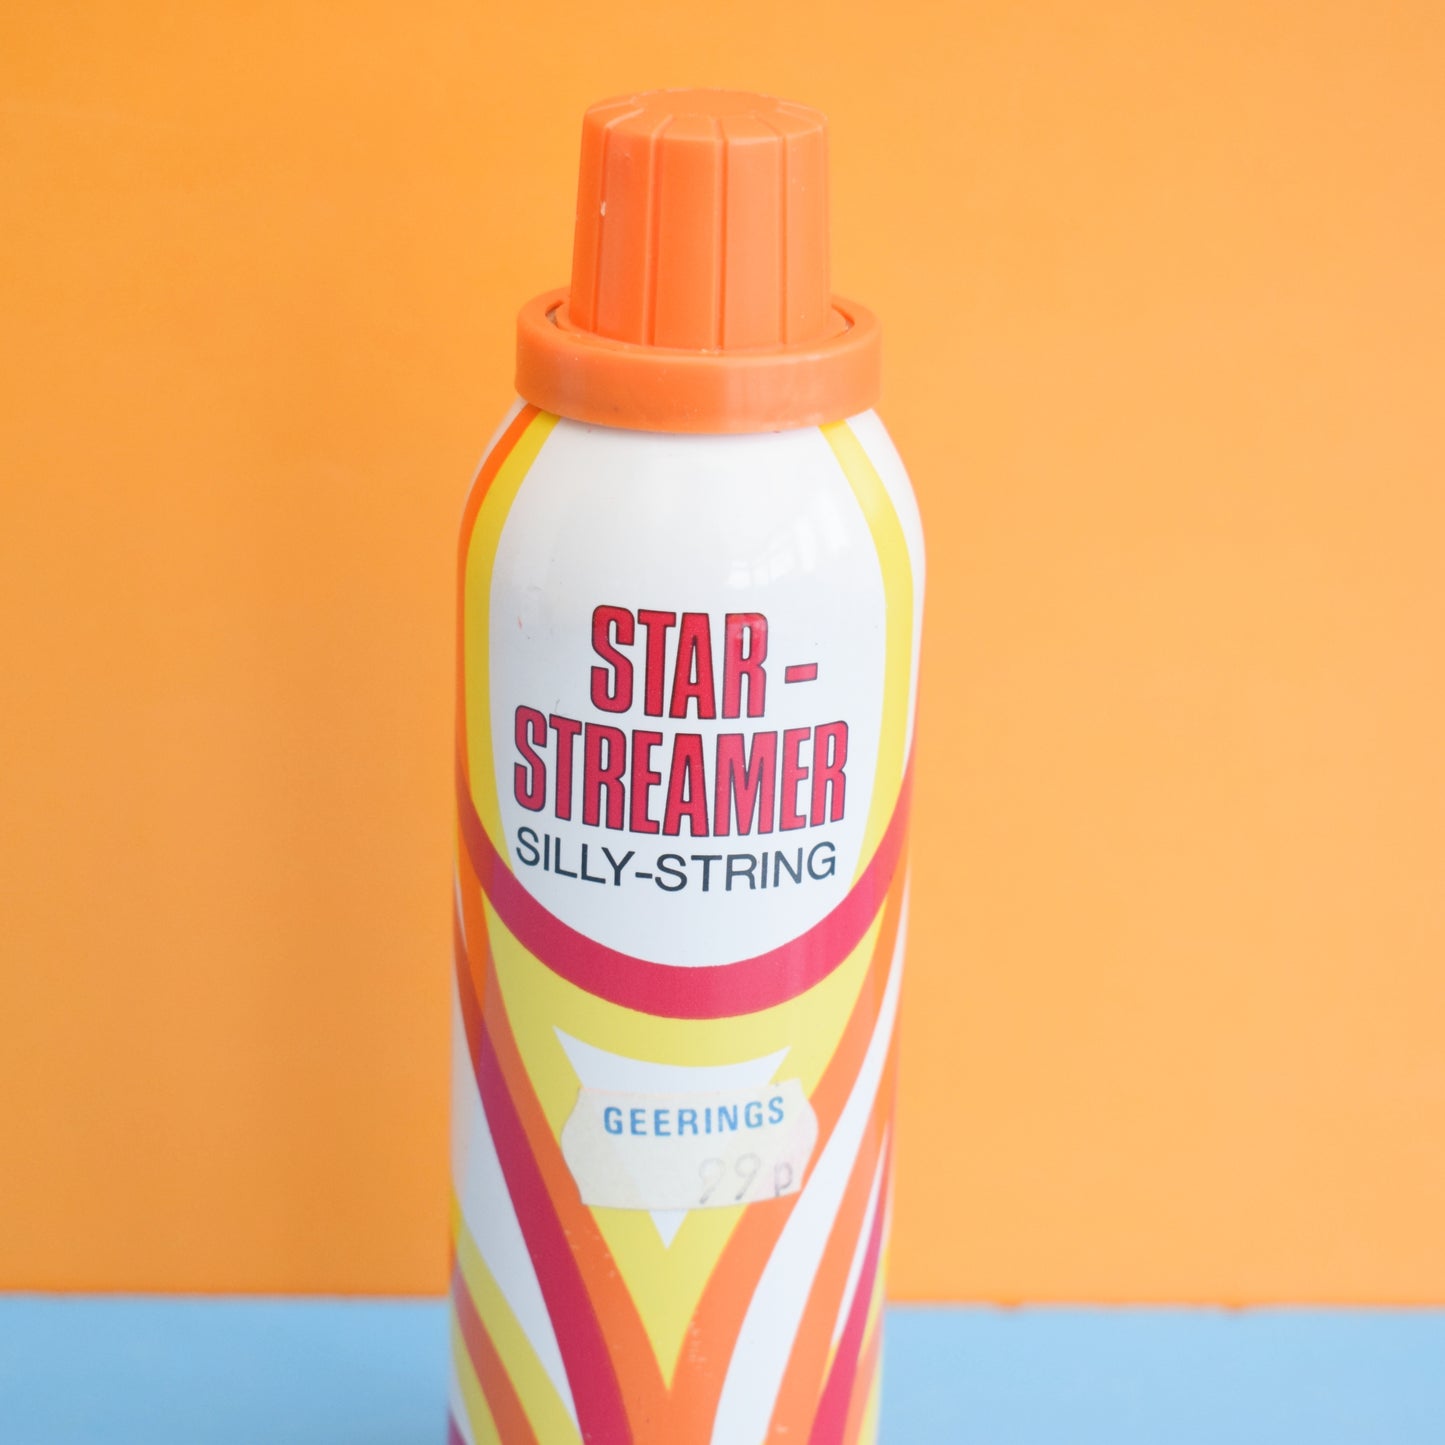 Vintage 1970s Star Streamer Silly String Can